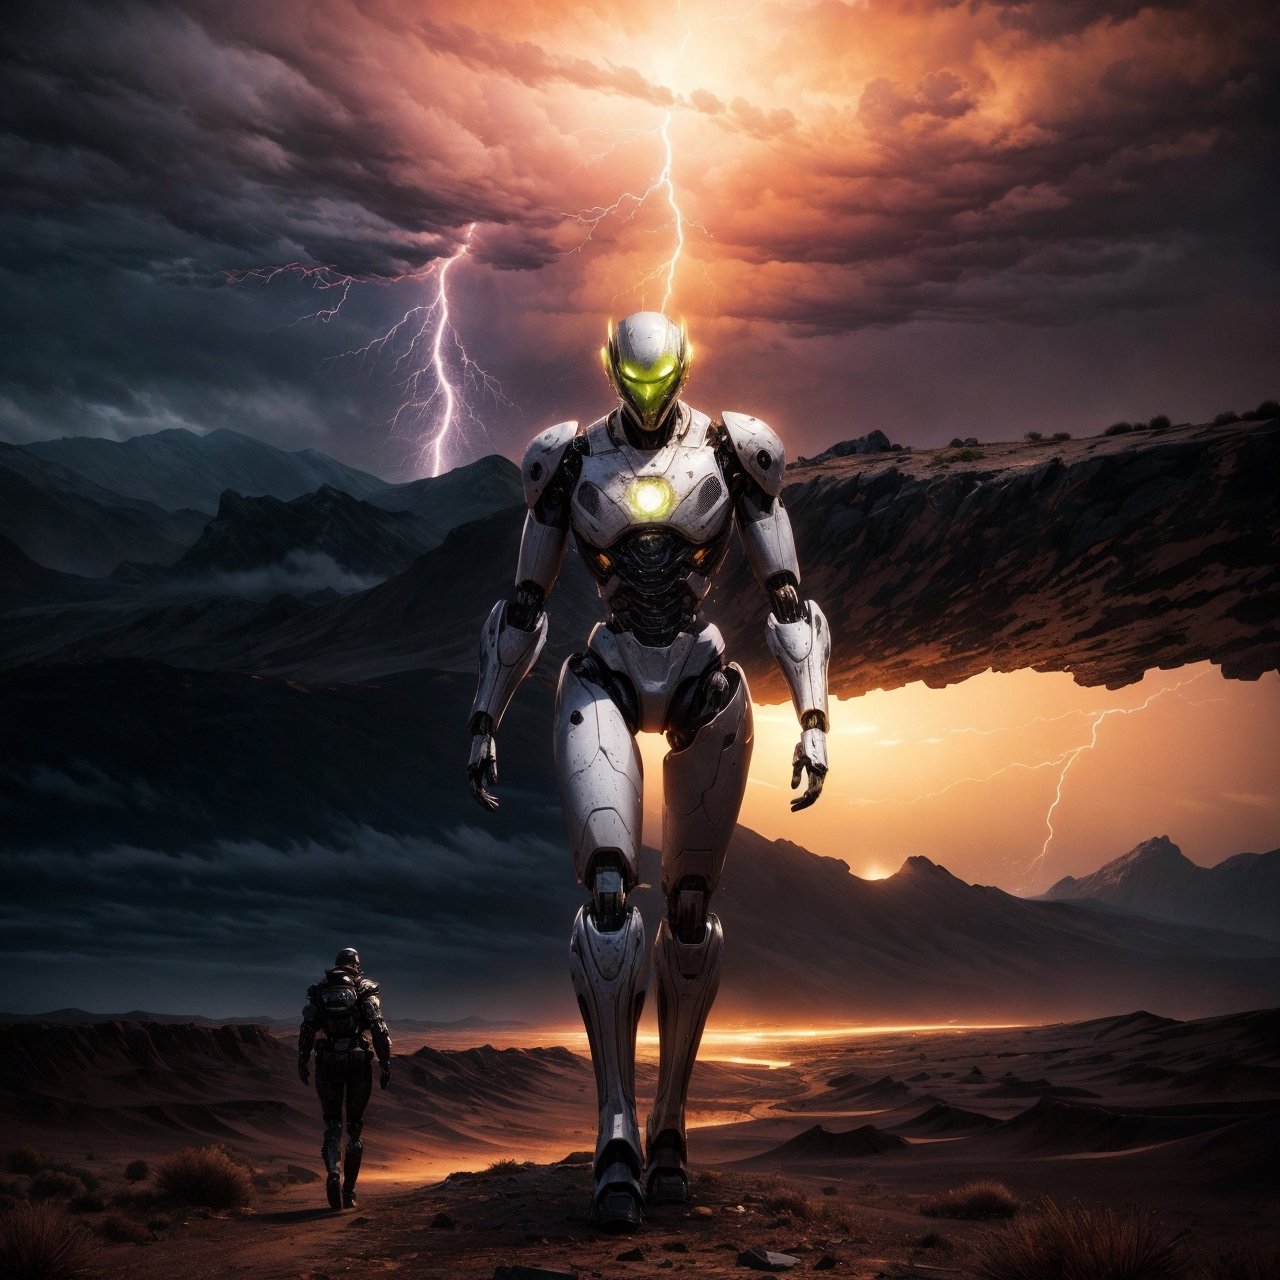 a giant, 20 ft tall android humanoid shaped robot is walking across the desert menacing. the android is metallic and machine like, rusty parts, shiny metal. a female mercenary is walking in front of ther robot. a detailed background of a vast alien desert landscape, sandstone ruins, sandstone hills, red sand, a stormy sky, dark menacing storm clouds, lightening illuminating the black clouds. windy, deserted, , SD 1.5, perfect hands,